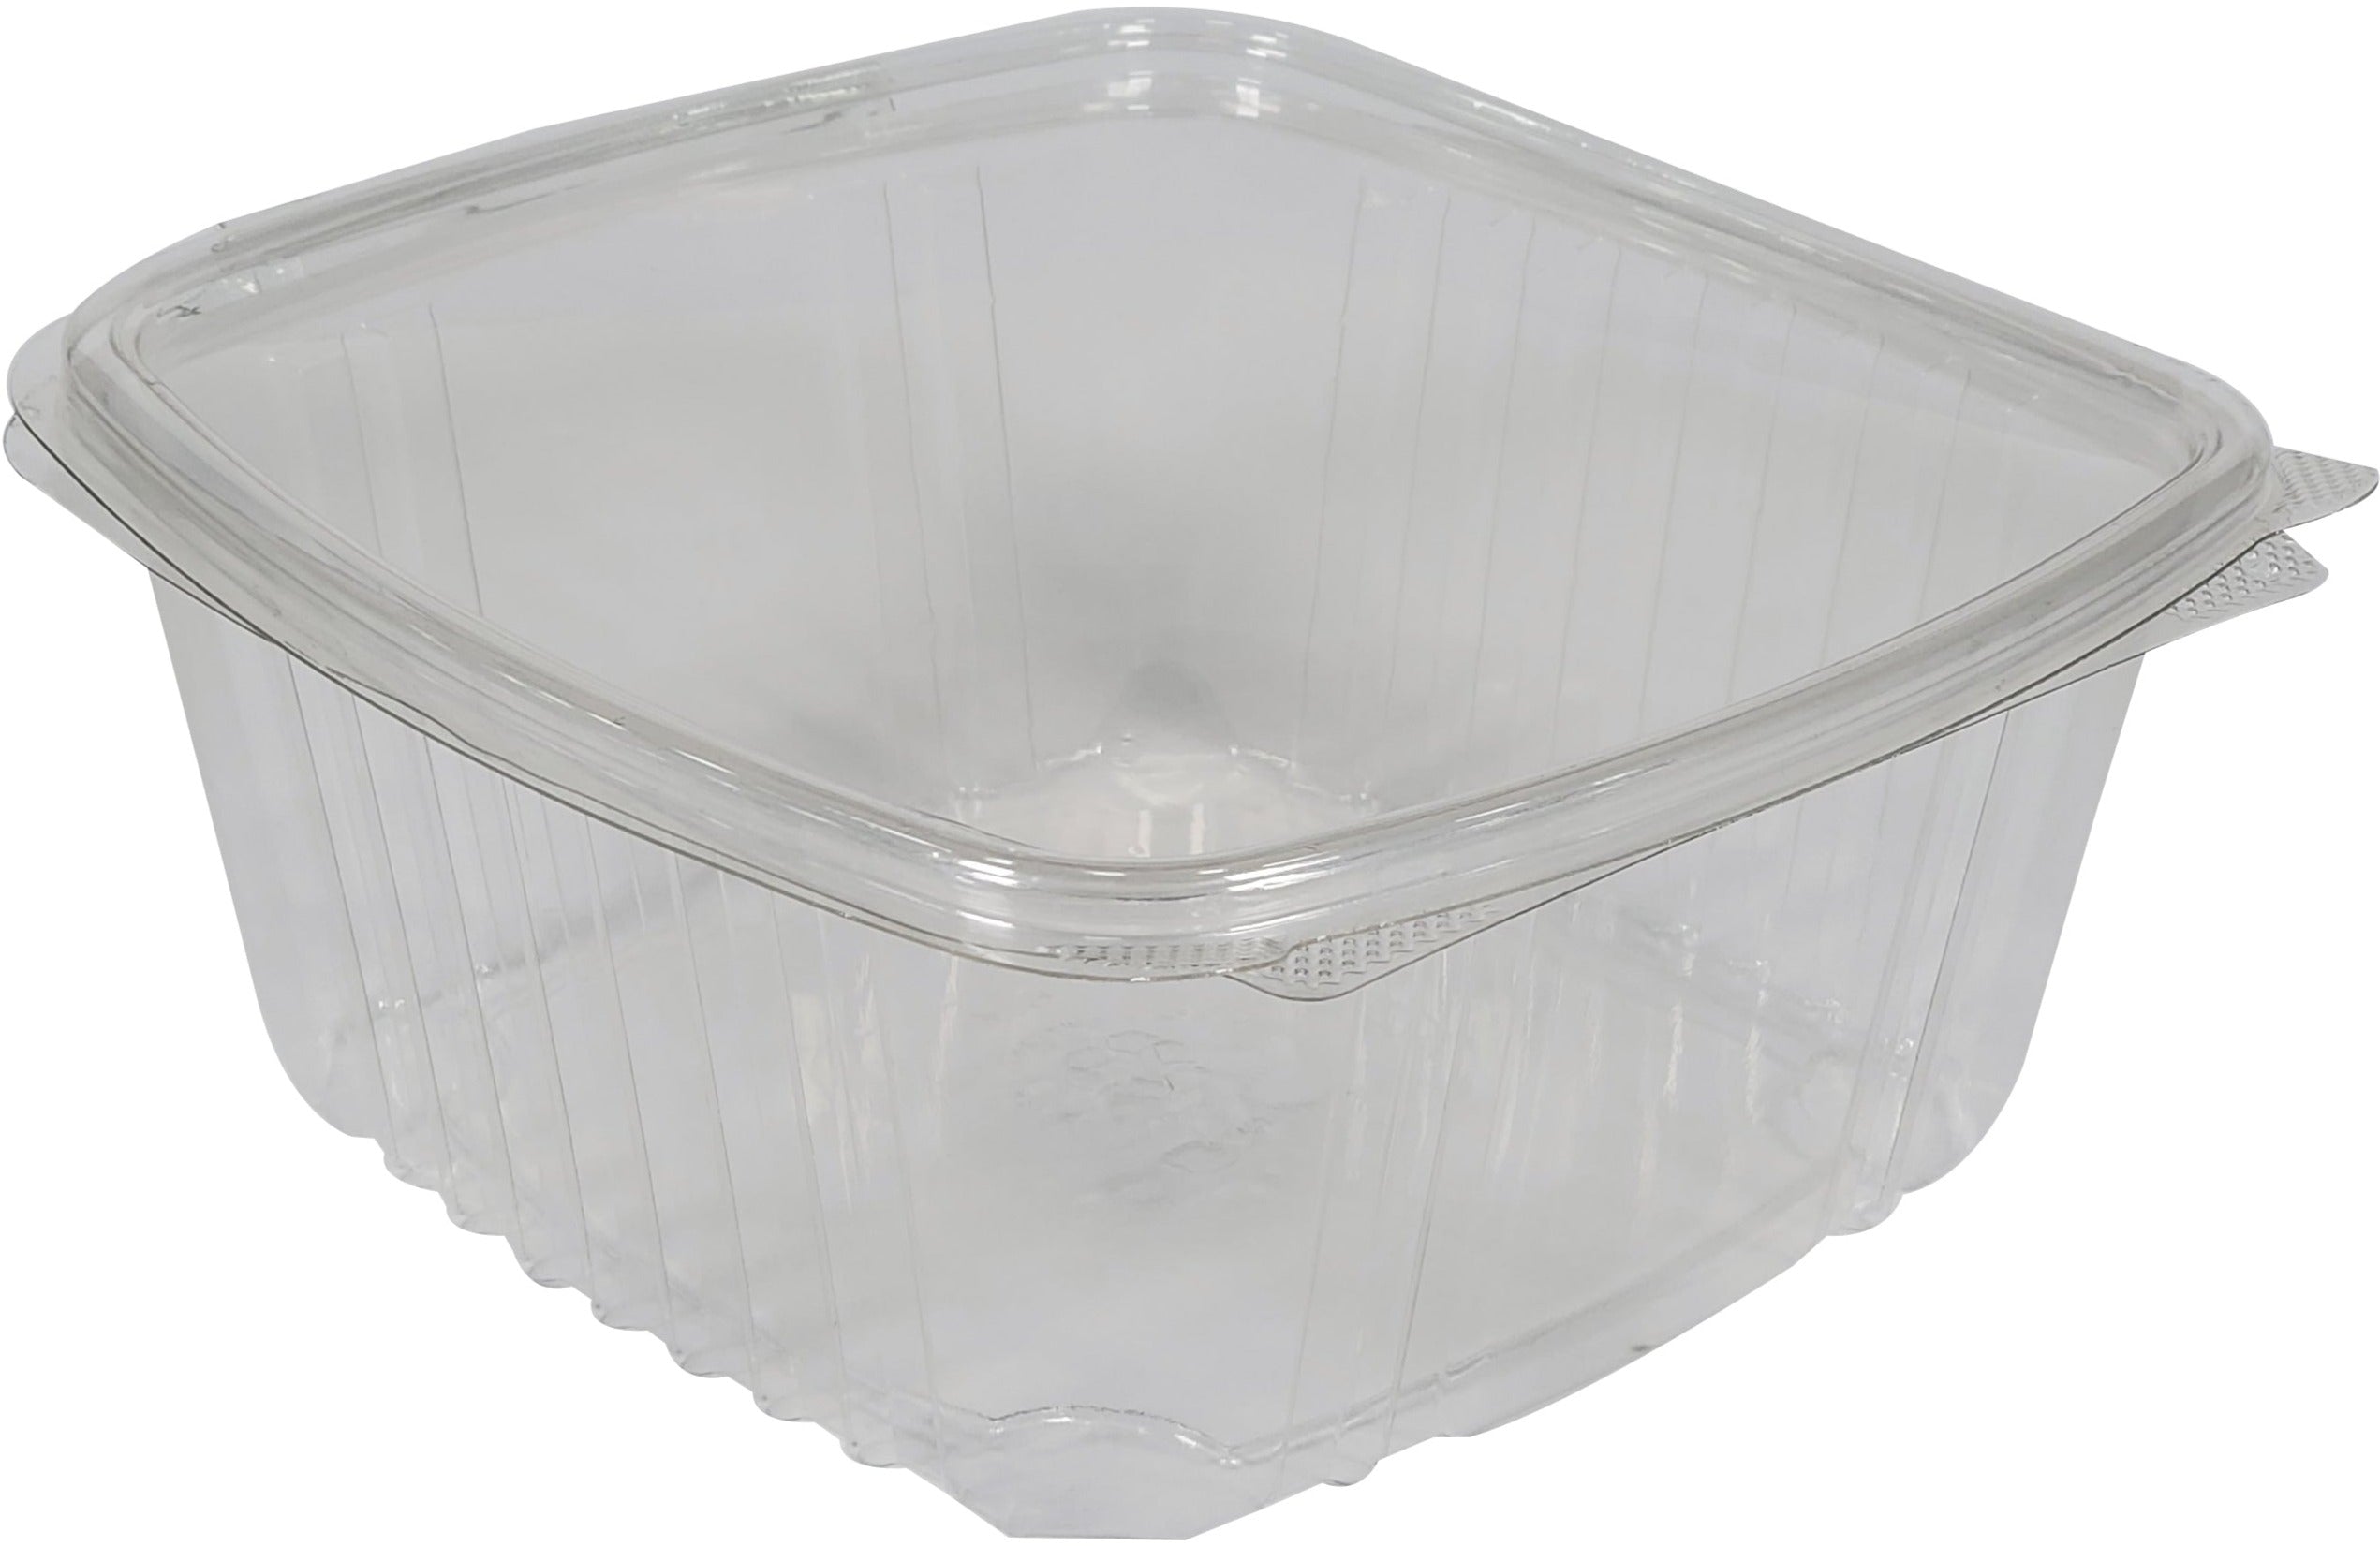 http://www.a1cashandcarry.com/cdn/shop/products/Genpak-Hinged-Deli-Container-Clear-64oz-AD64-Packaging-Genpak-Genpak-Hinged-Deli-Container-Clear-64oz-AD64-Packaging-Genpak-Genpak-Hinged-Deli-Container-Clear-64oz-AD64-Packaging-Genp_2aebdb0d-2e0a-4f51-b280-ccb1a065bfb4.jpg?v=1697941904